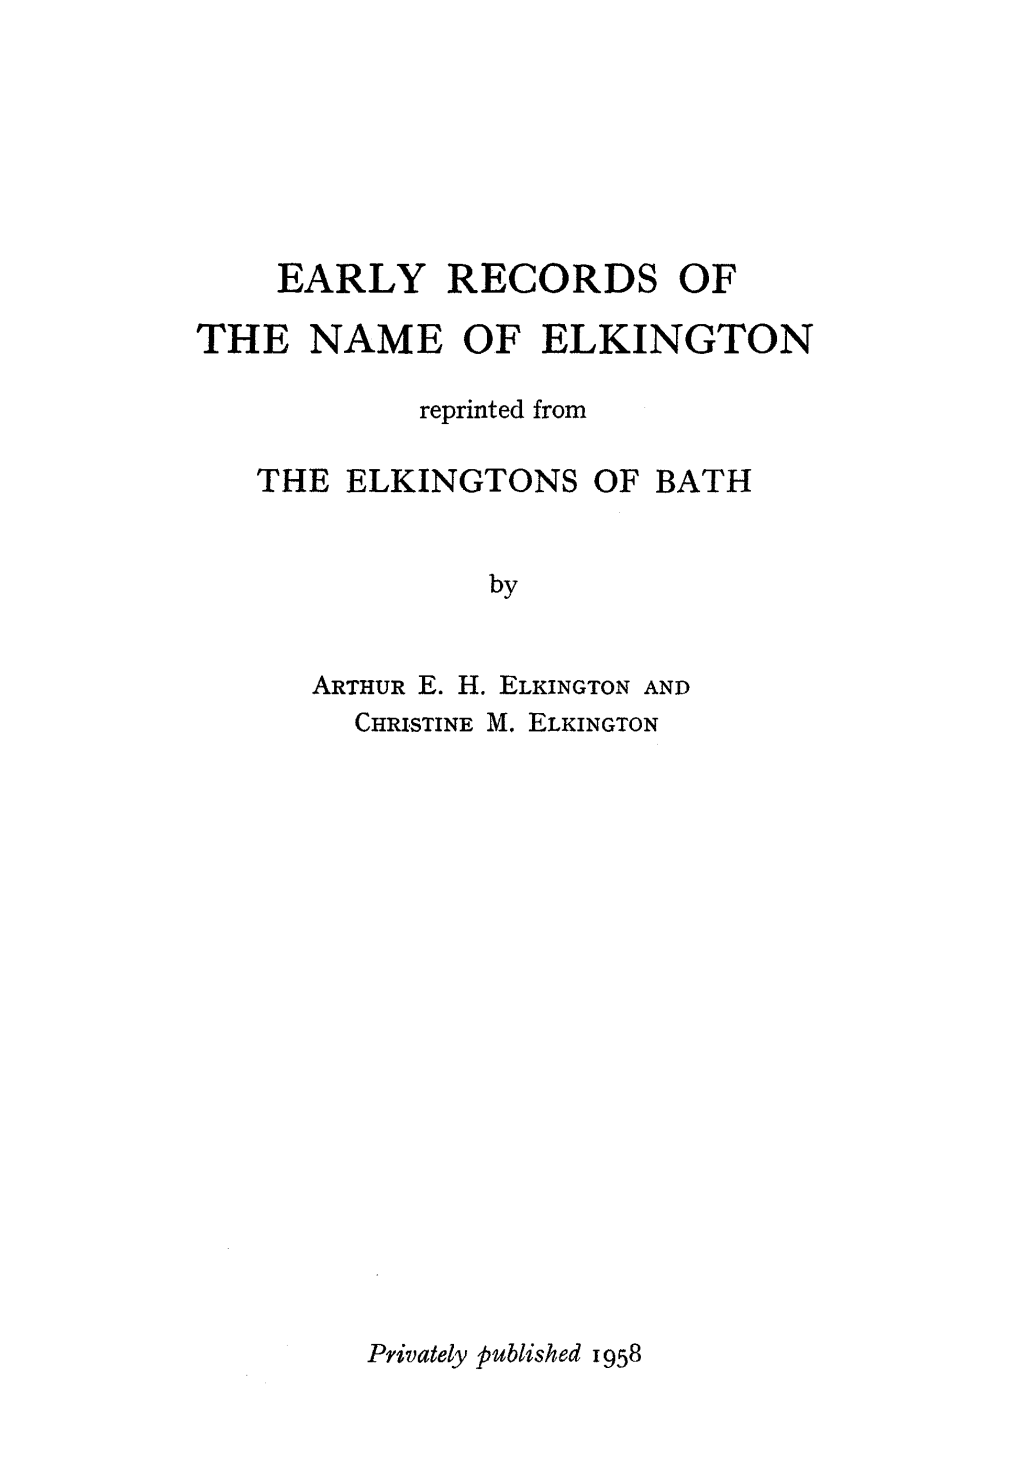 Early Records of the Name of Elkington